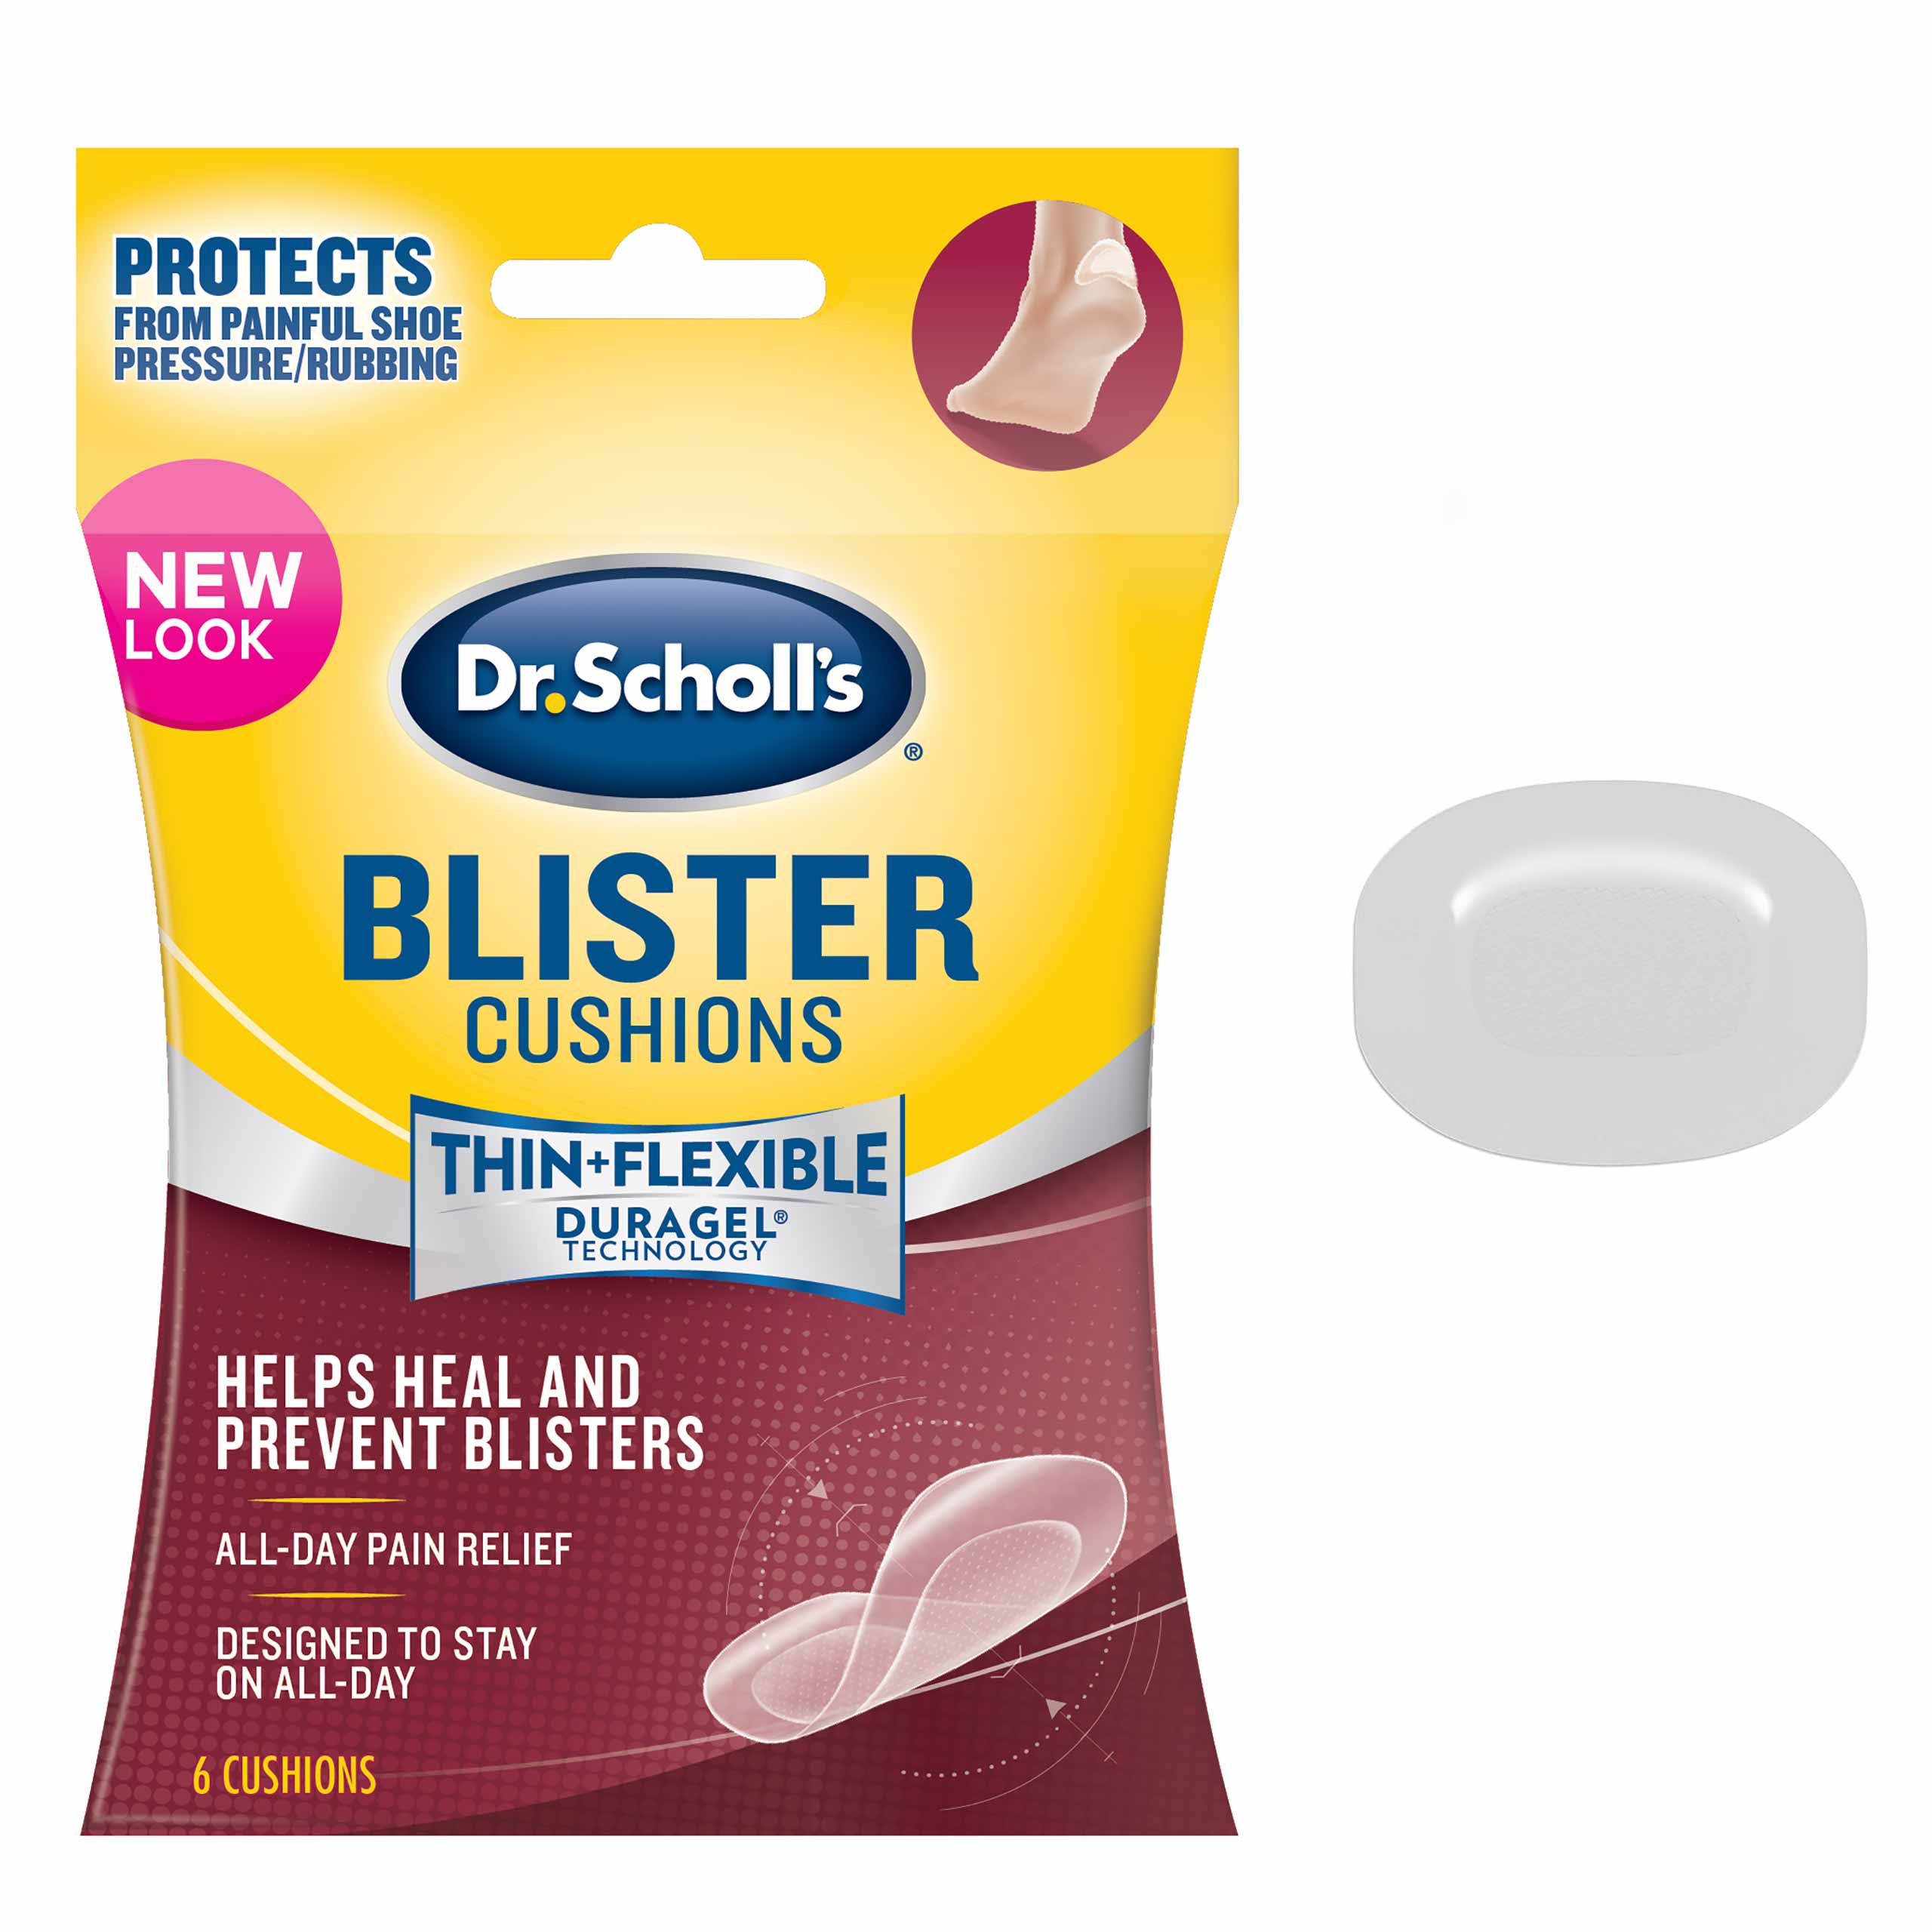 Dr. Scholl’s Blister Cushions